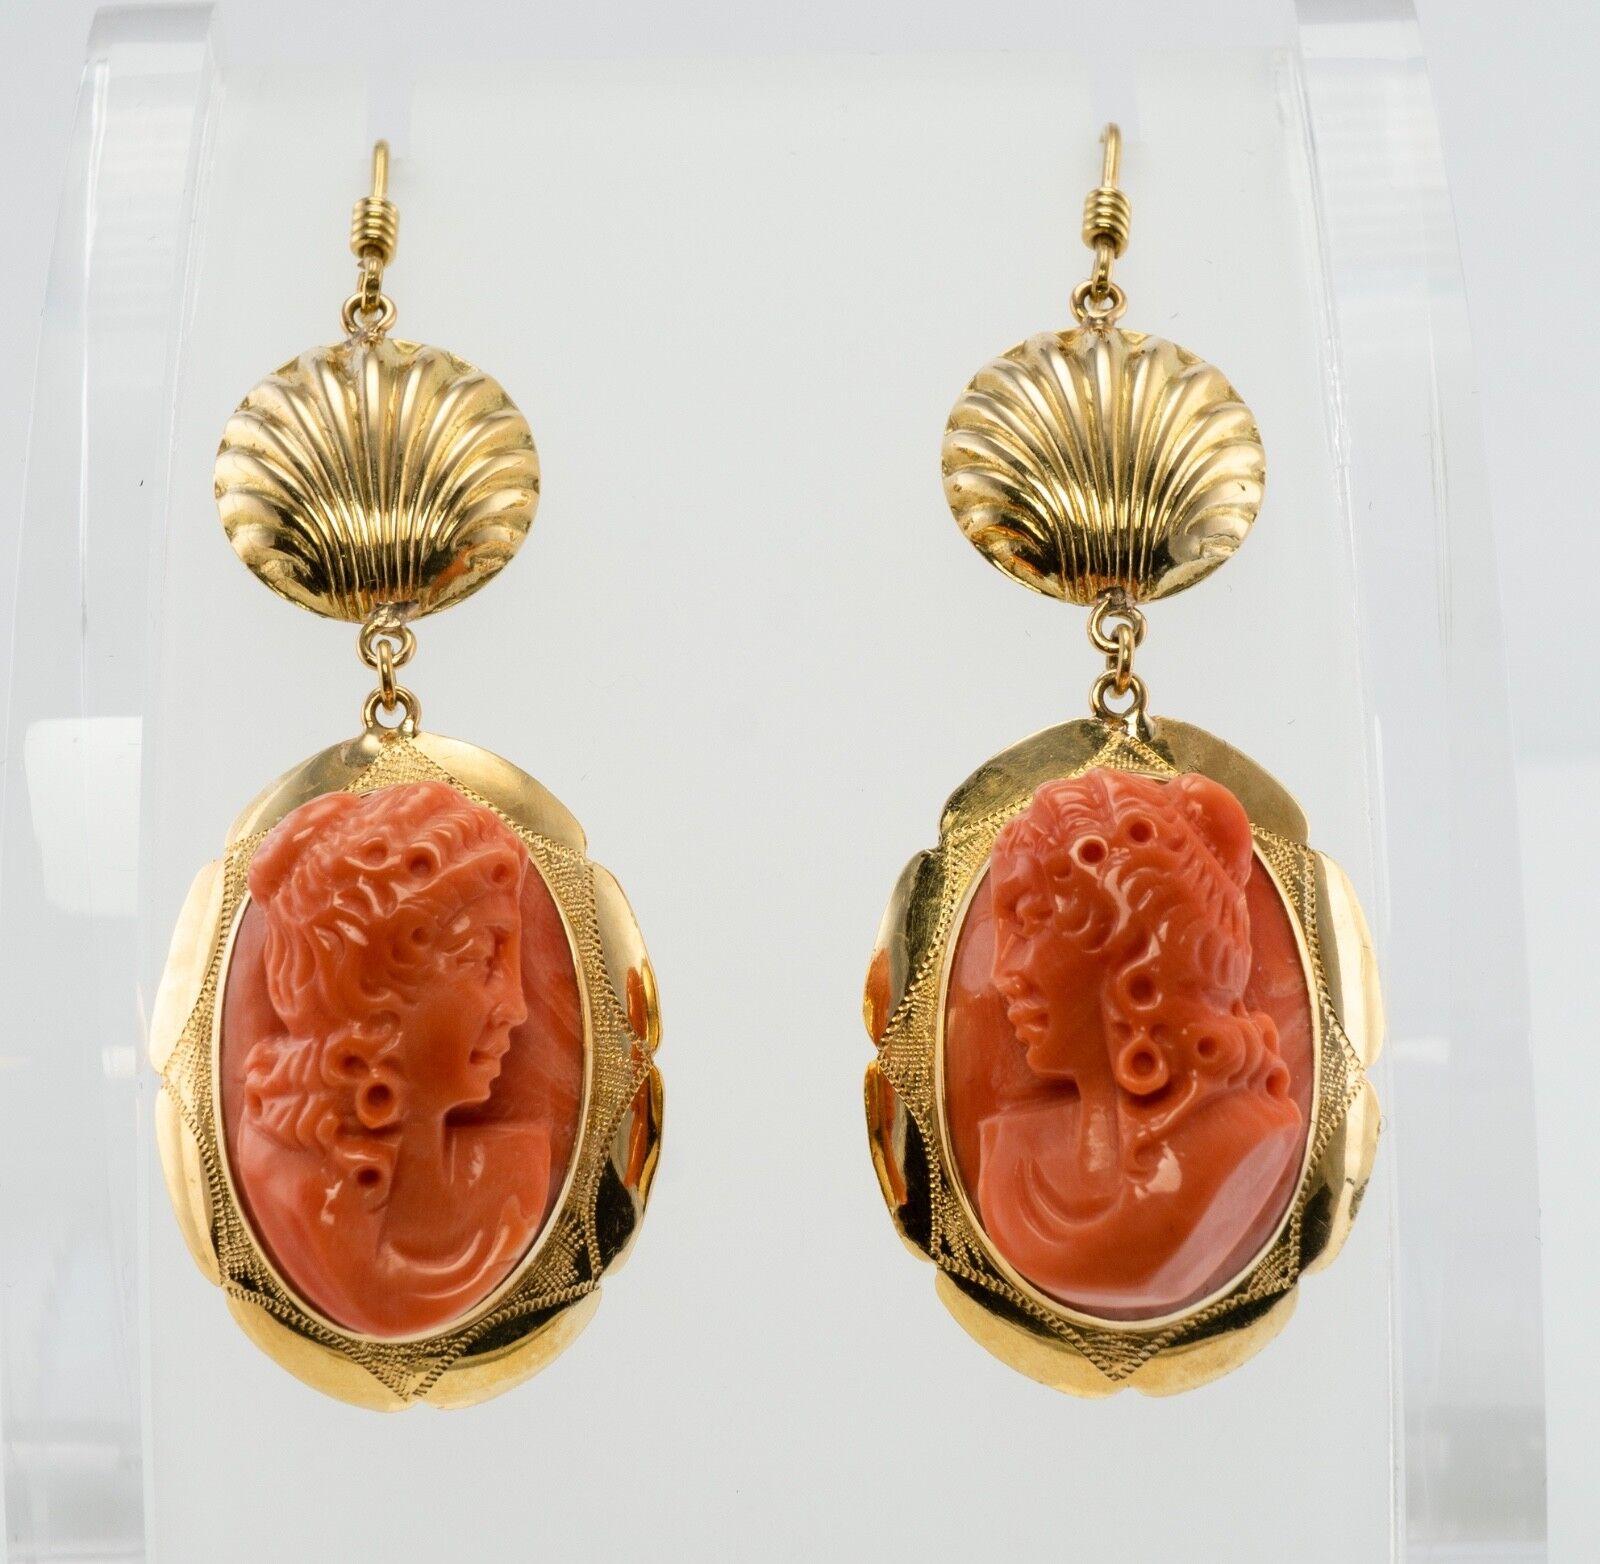 This gorgeous pair of earrings is finely crafted in solid 18K Yellow gold, they also have Italian marks. The genuine Coral high profile cameos measure 22mm x 15mm. They are highly detailed and very well made. The bottom dangling part of each earring